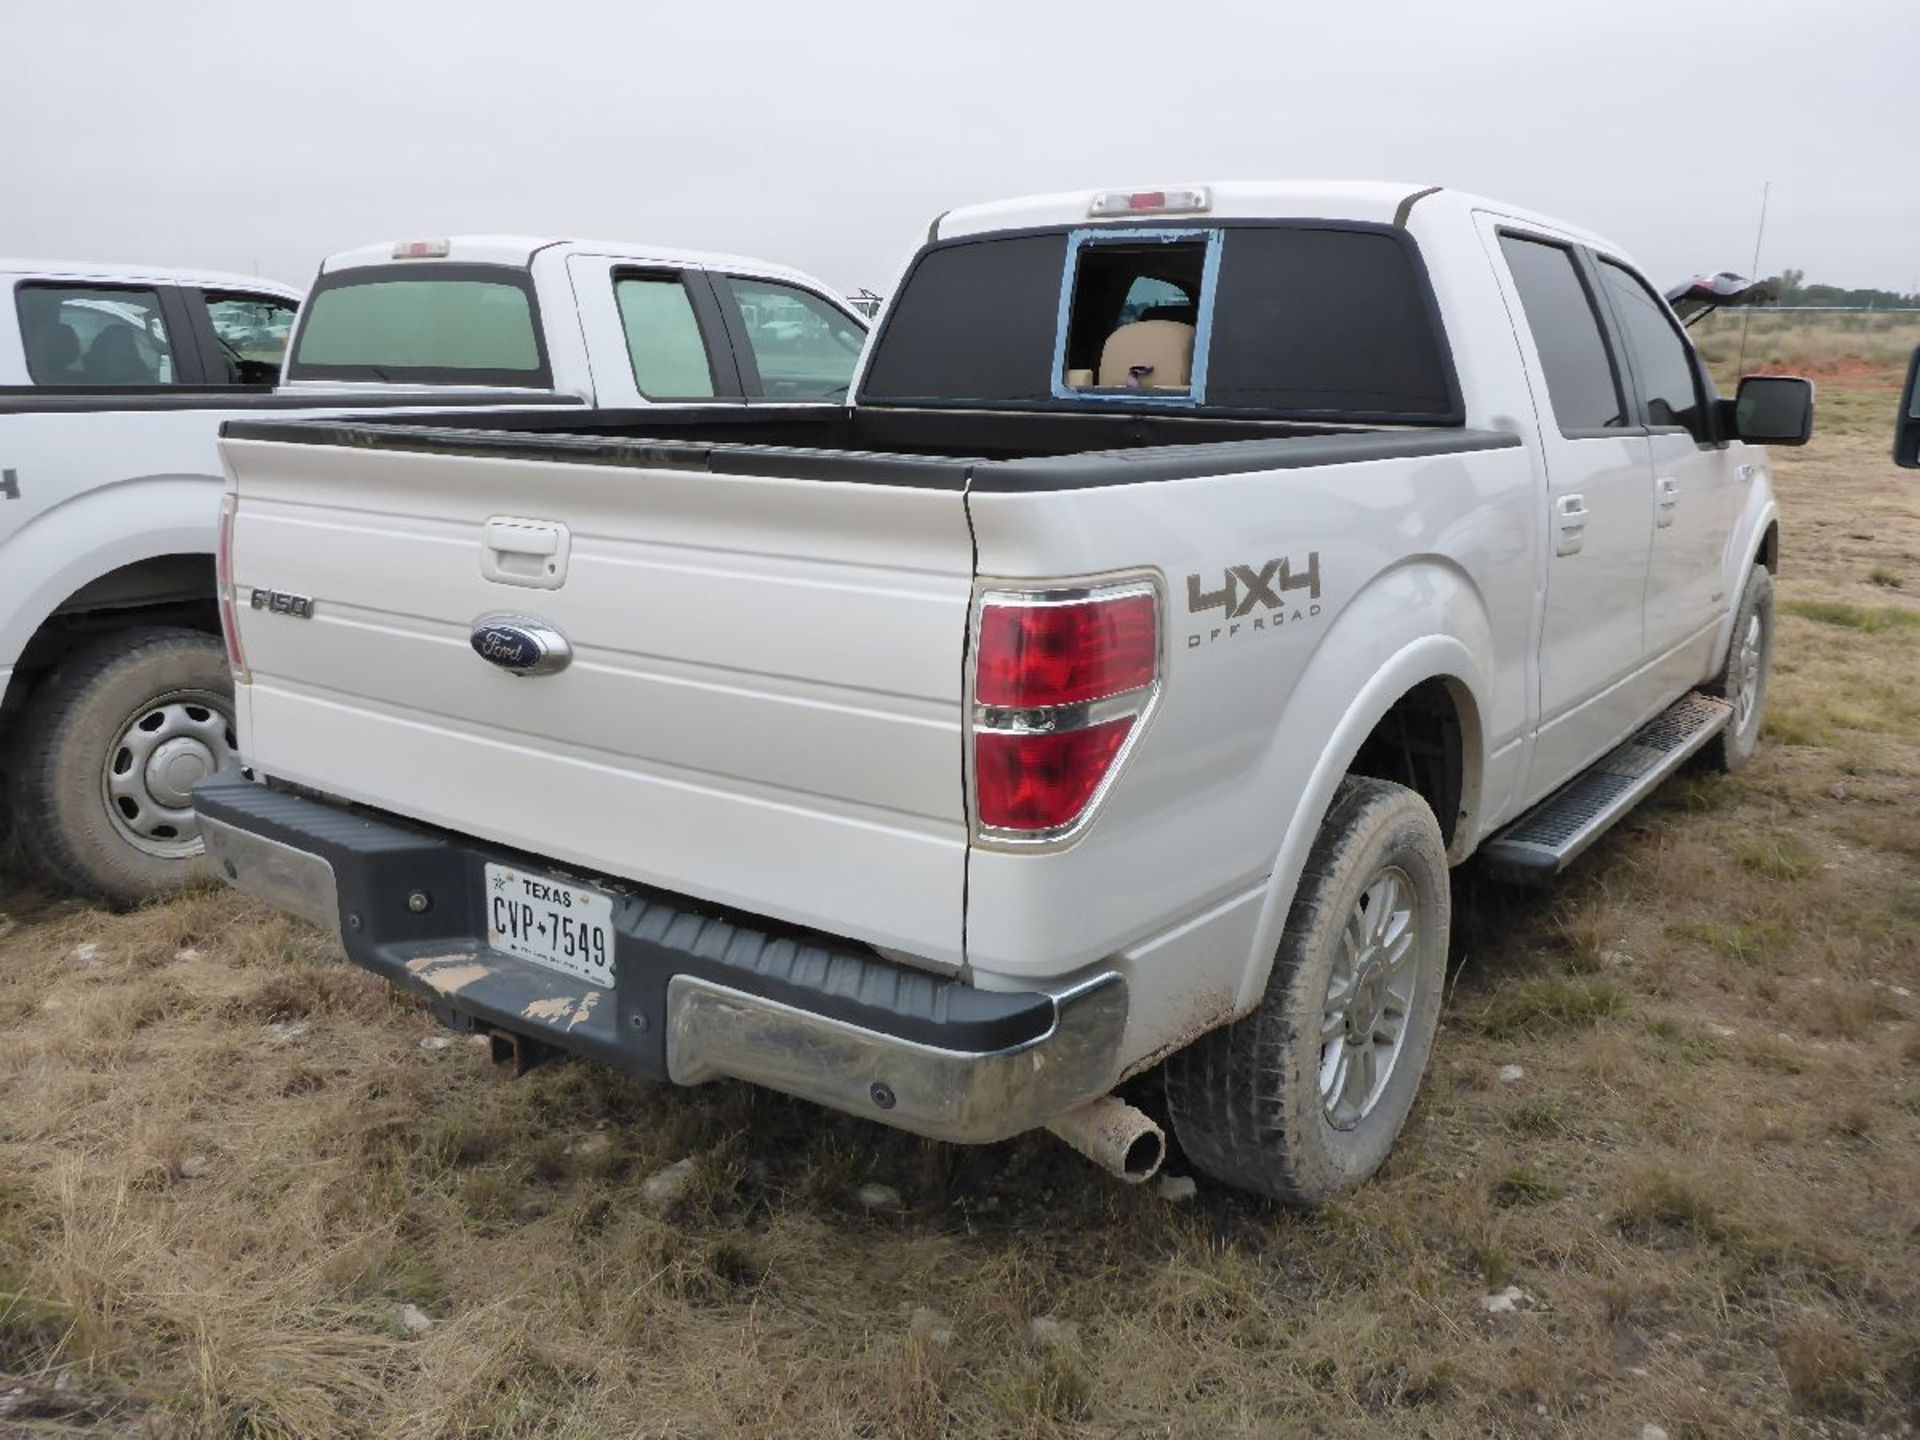 2011 Ford Model F150 Lariat Pickup Truck - Image 2 of 5